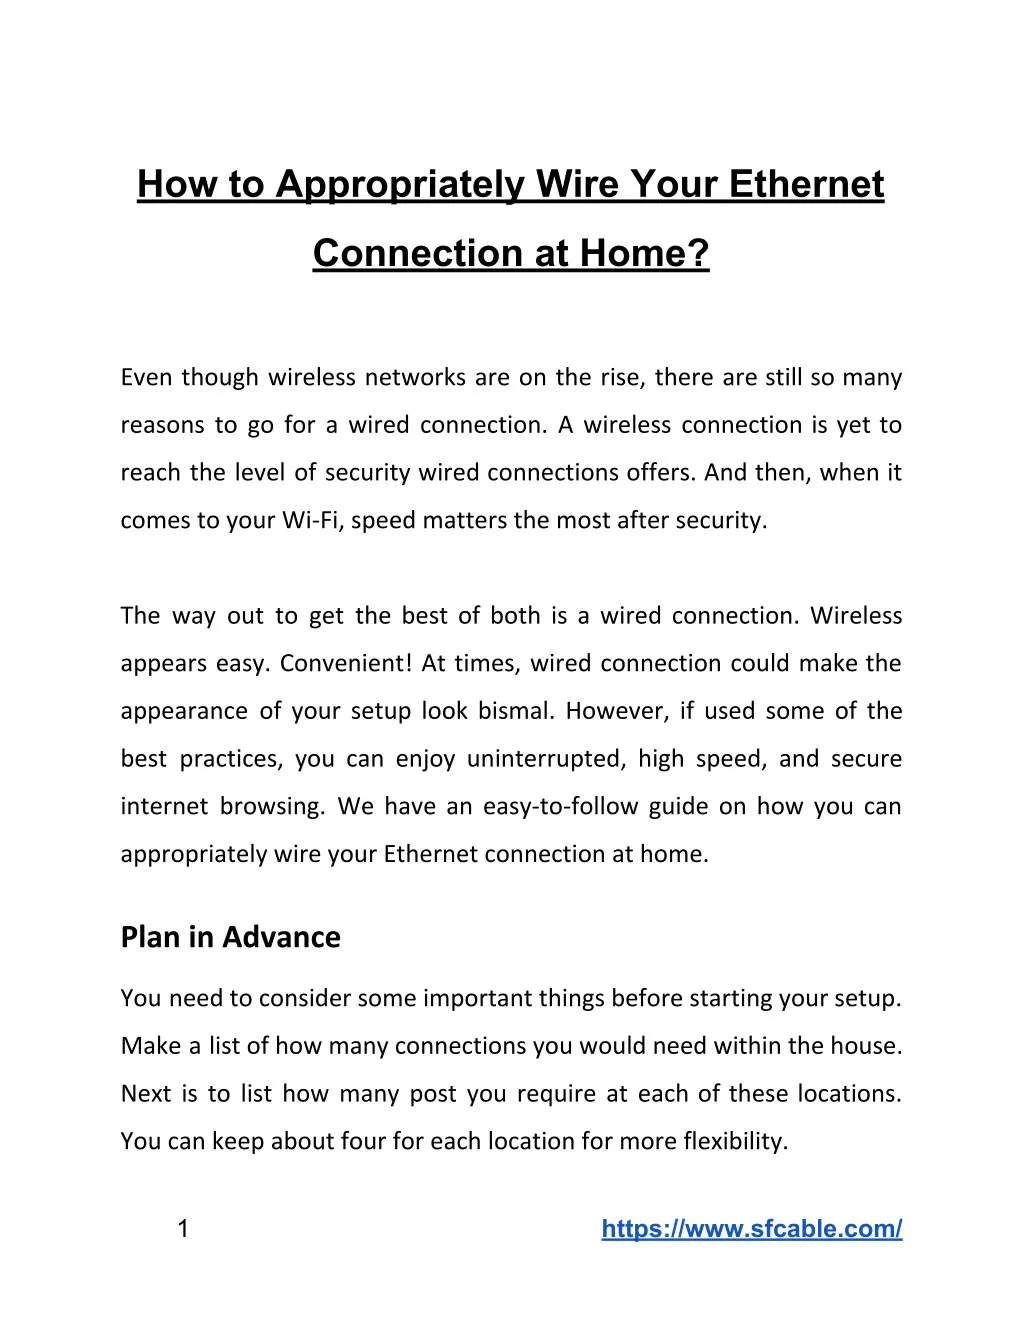 how to appropriately wire your ethernet